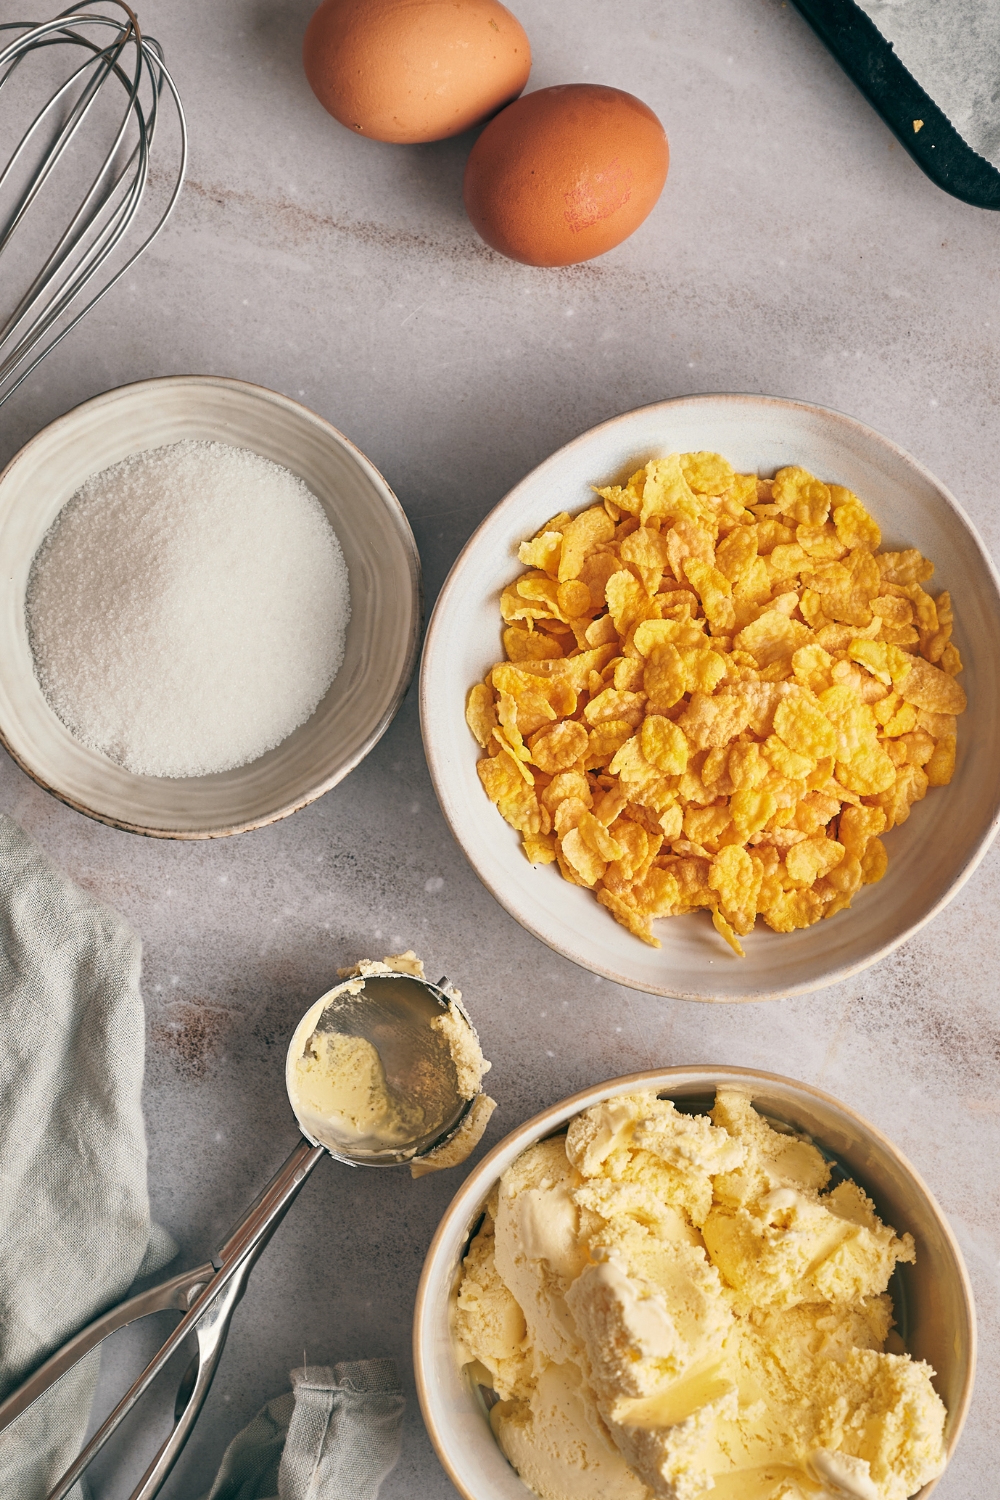 A countertop with two eggs, a bowl of sugar, a bowl of cornflakes, and a bowl of vanilla ice cream.